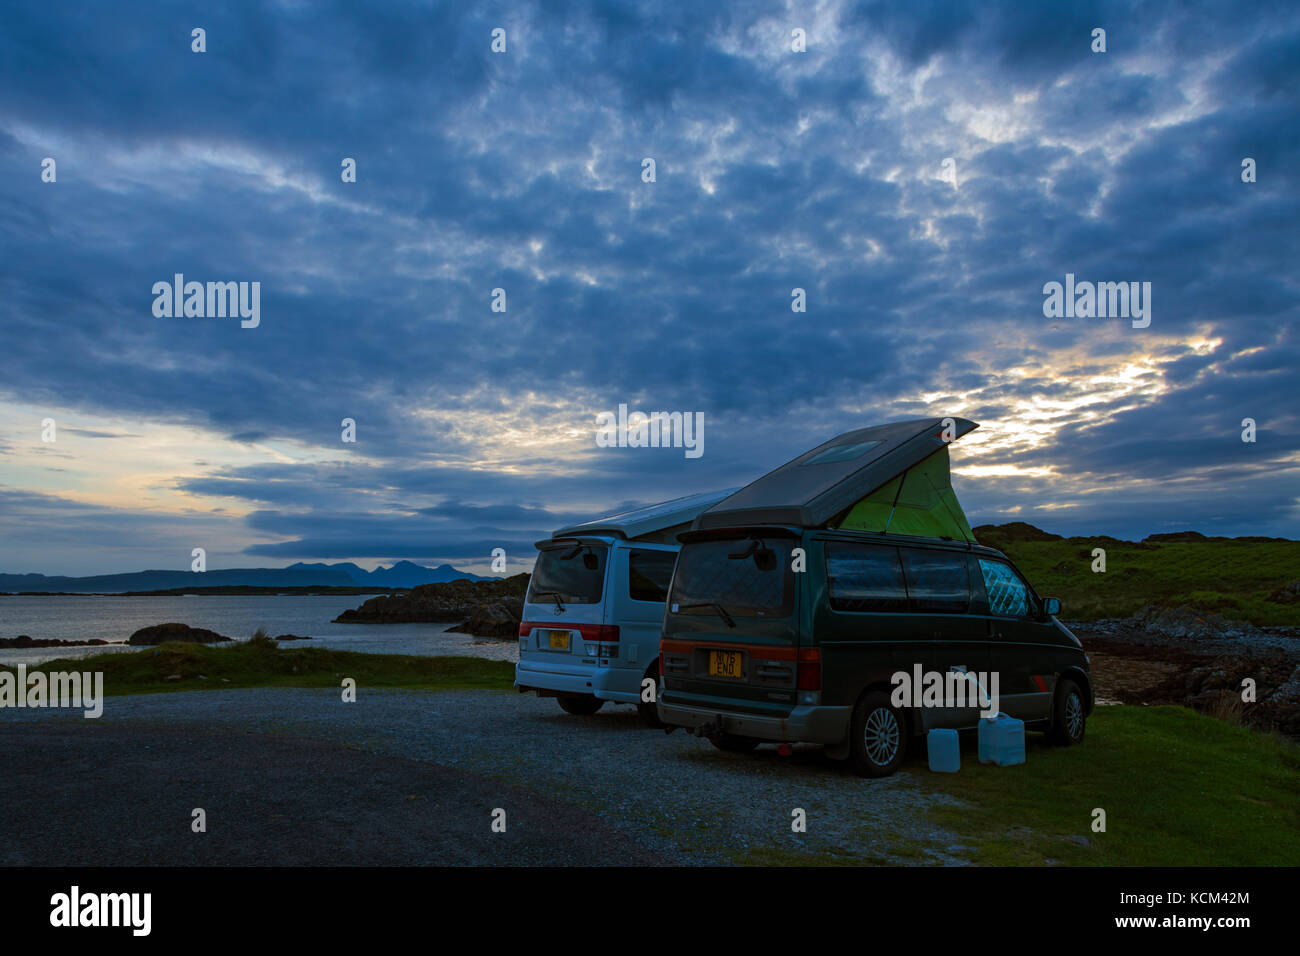 Two Mazda Bongo camper vans on the Rhue road, near Arisaig, Scotland, UK.  The Isle of Rum in the distance. Stock Photo